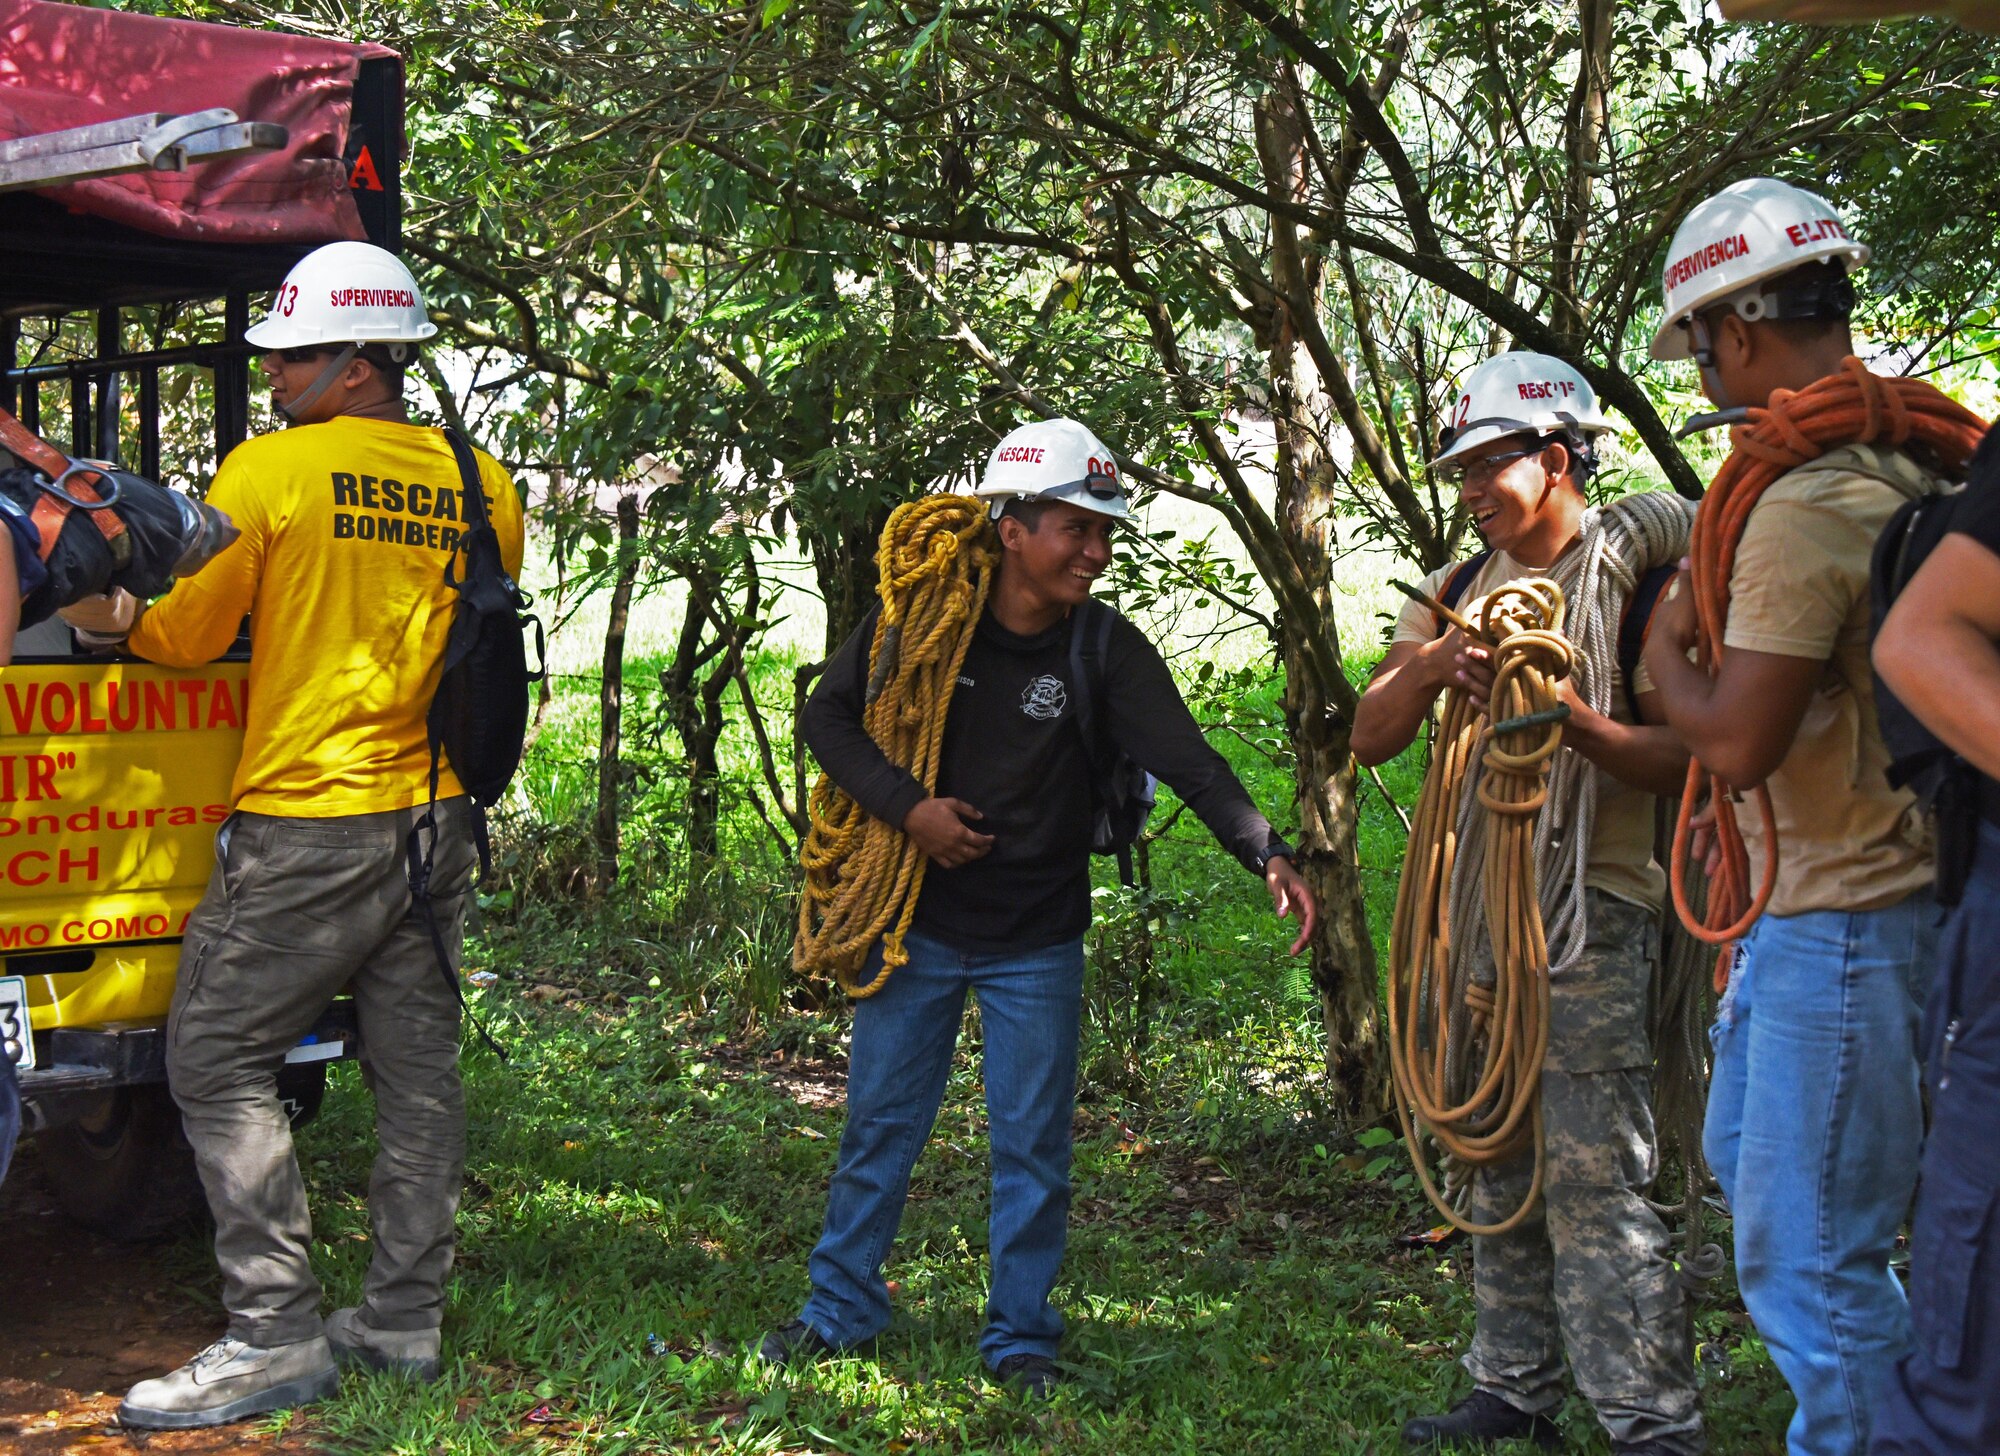 Honduran PUMCIR (Personal Utilizado en Misiones Contra Incendio y Rescate – Personnel Used in Fire and Rescue) volunteers prepare to conduct search and rescue training in the Comayagua National Park near El Volcan, Honduras, Sept. 24, 2016. The PUMCIR team, consisting of Bomberos (firefighters) and a doctor who came from the surrounding towns of La Paz, Comayagua, Siguatepeque and La Esperanza, were 13 of more than 750 volunteers trained since 1994 by Herberth Gaekel, PUMCIR founder and instructor. (U.S. Air Force photo by Capt. David Liapis)